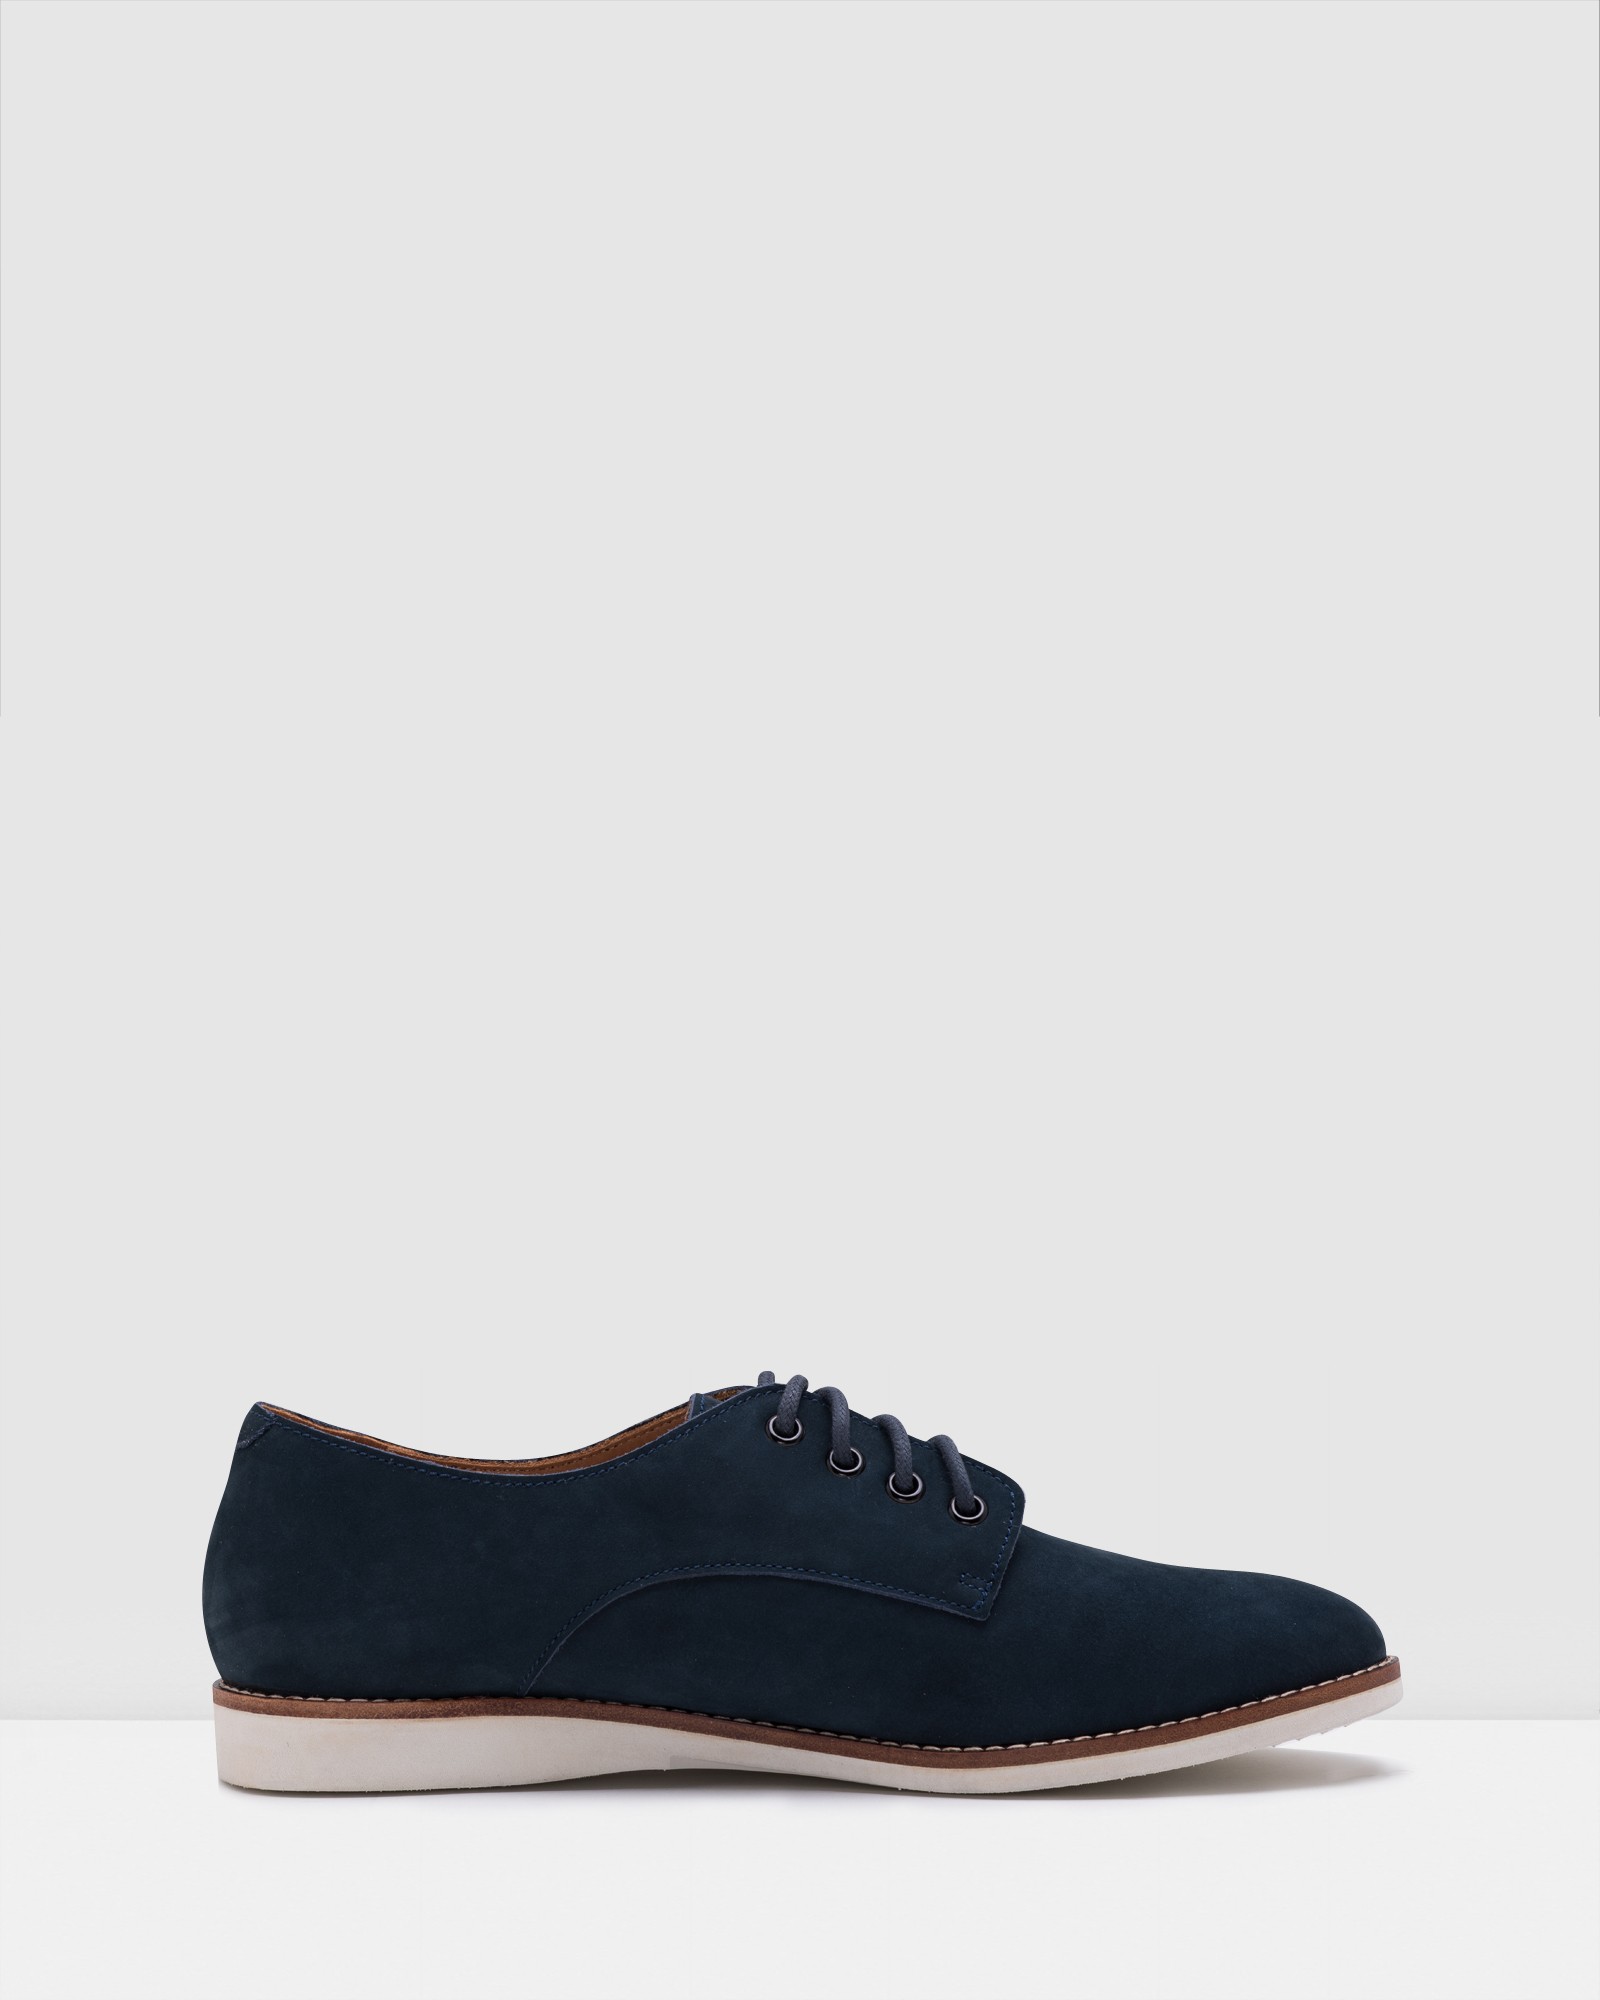 Derby Mens Shoes Navy by Rollie | ShoeSales